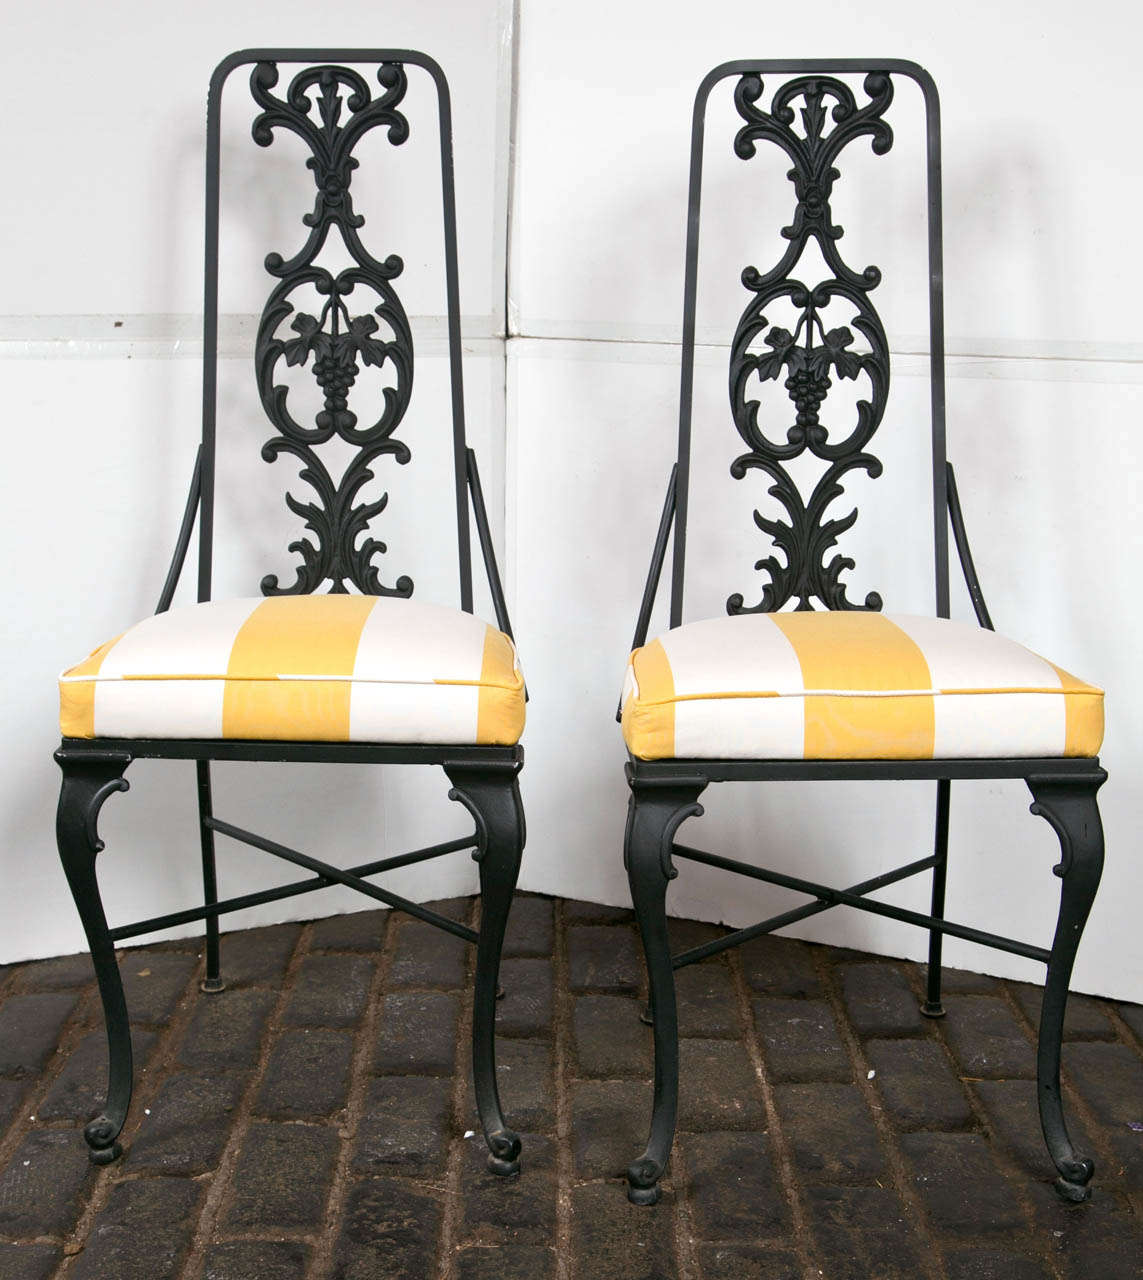 1960s Hollywood Regency black painted aluminum high back chairs. Newly reupholstered in Cowtan and Tout yellow and white striped fabric.